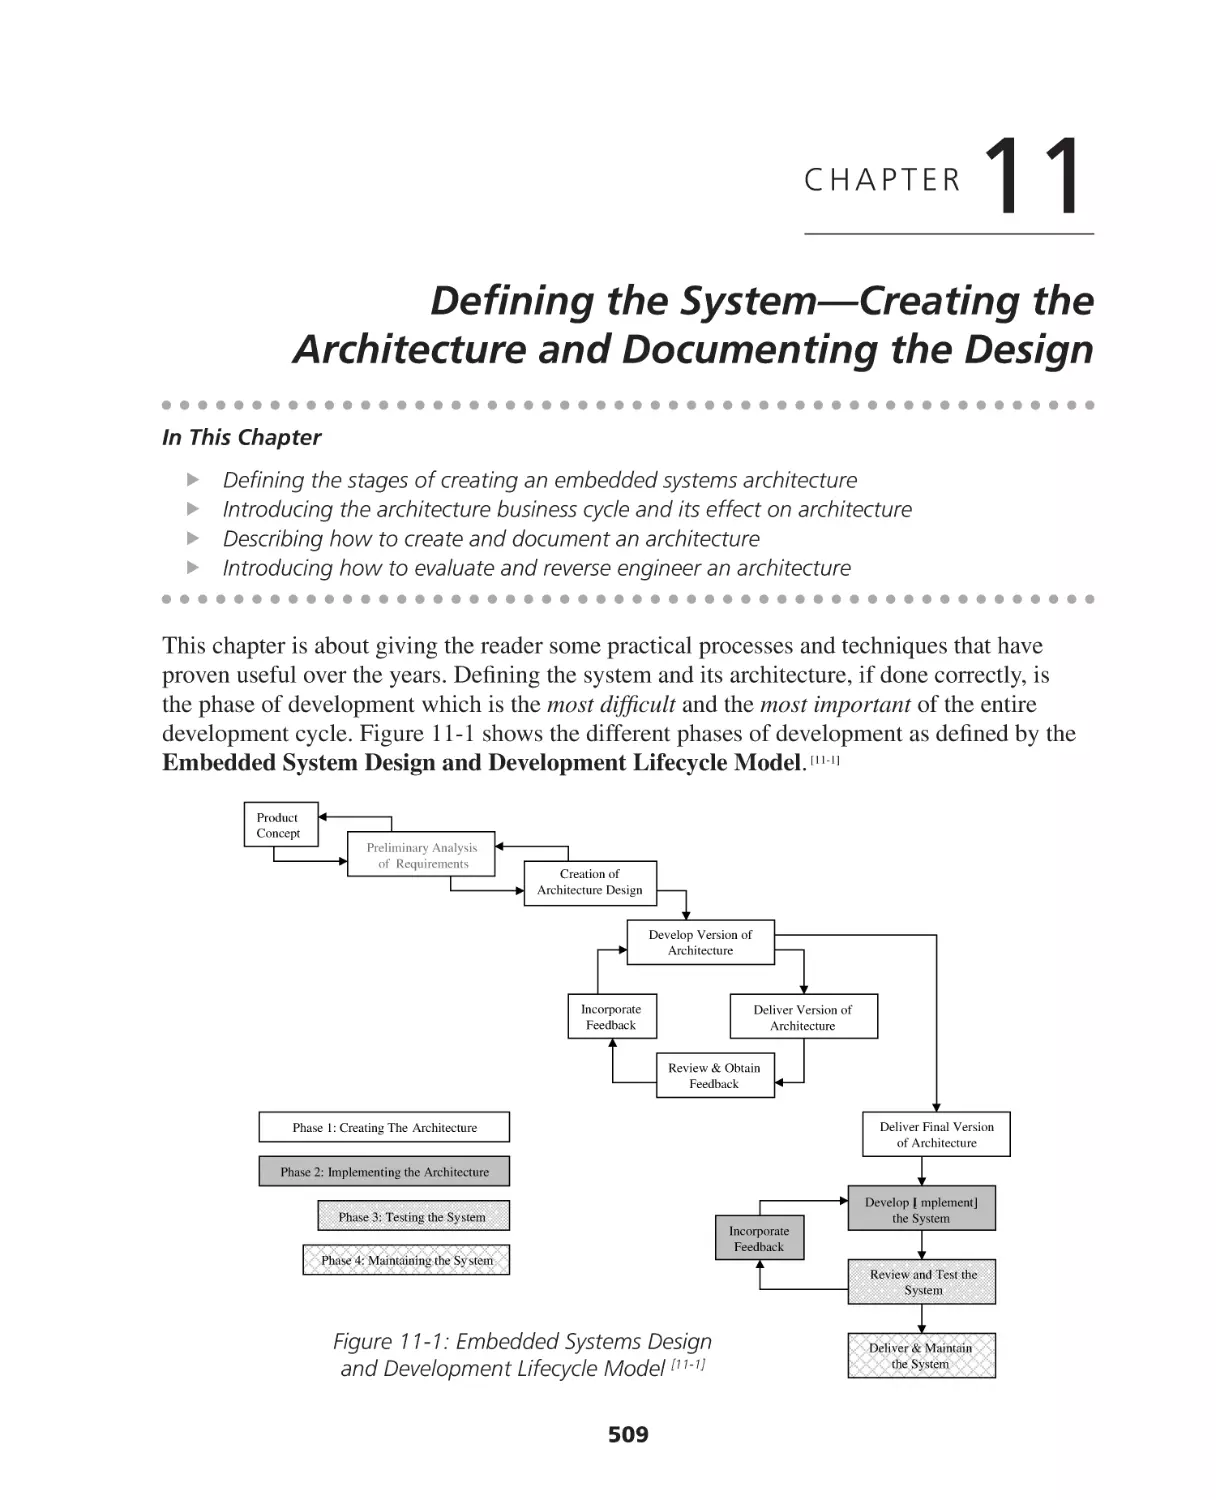 Chapter 11. Defining the System—Creating the Architecture and Documenting the Design